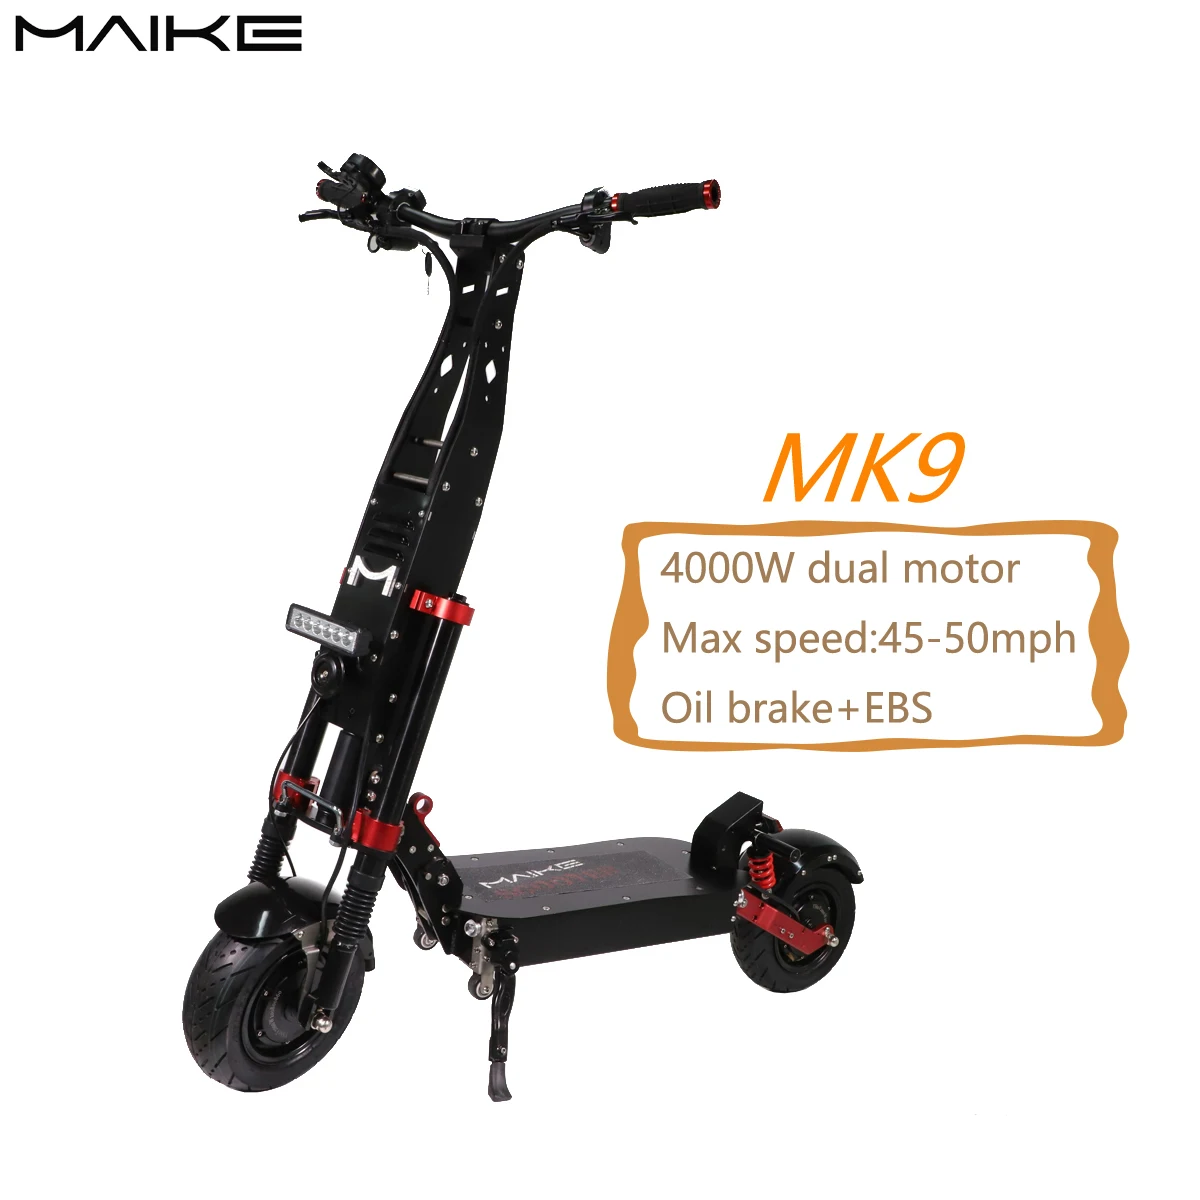 

Good Price Good Quality maike mk9 60v 4000w dual motor 11 inch folding off road fast electric kick scooters for adults